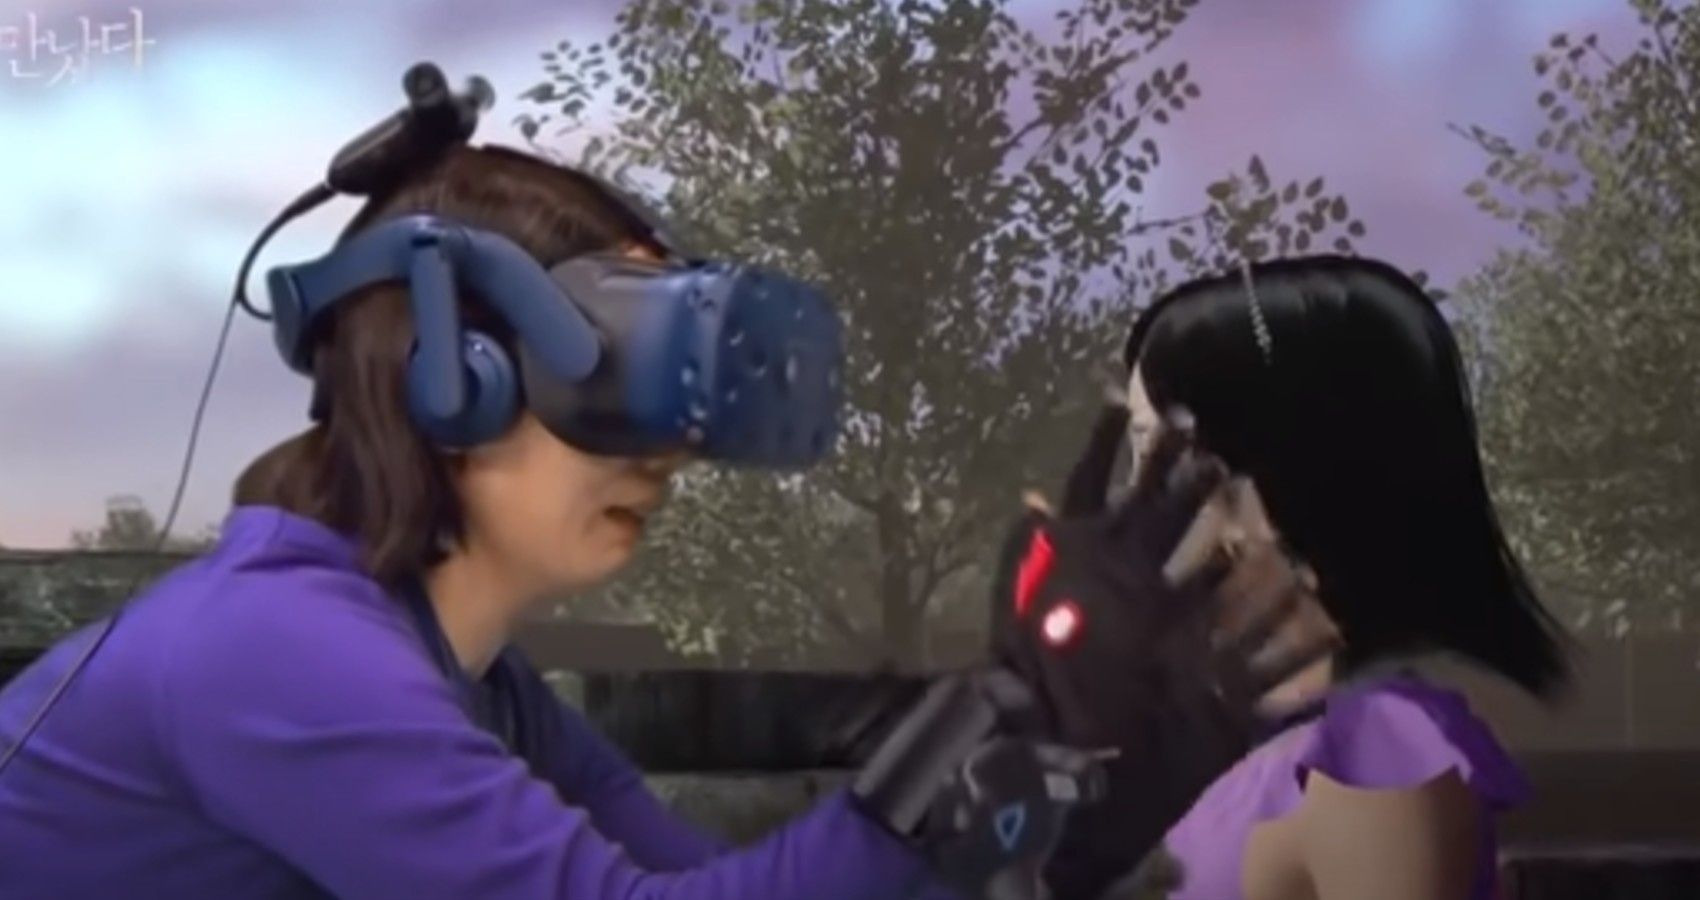 Mother seeing her daughter on virtual reality